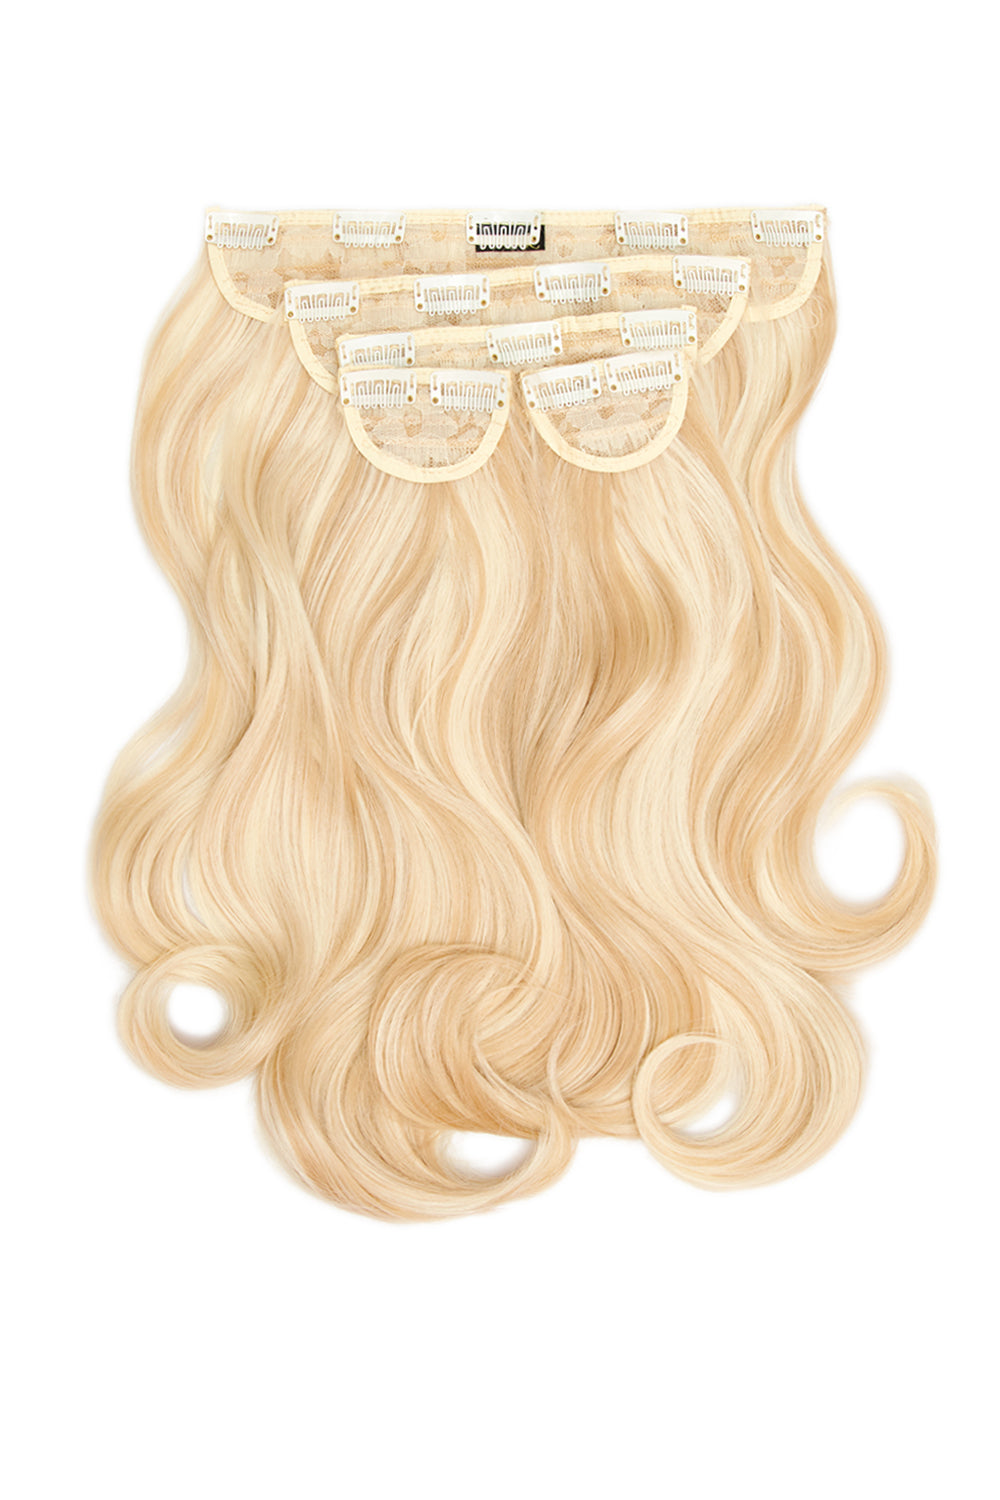 Super Thick 16" 5 Piece Blow Dry Wavy Clip In Hair Extensions - Highlighted Champagne